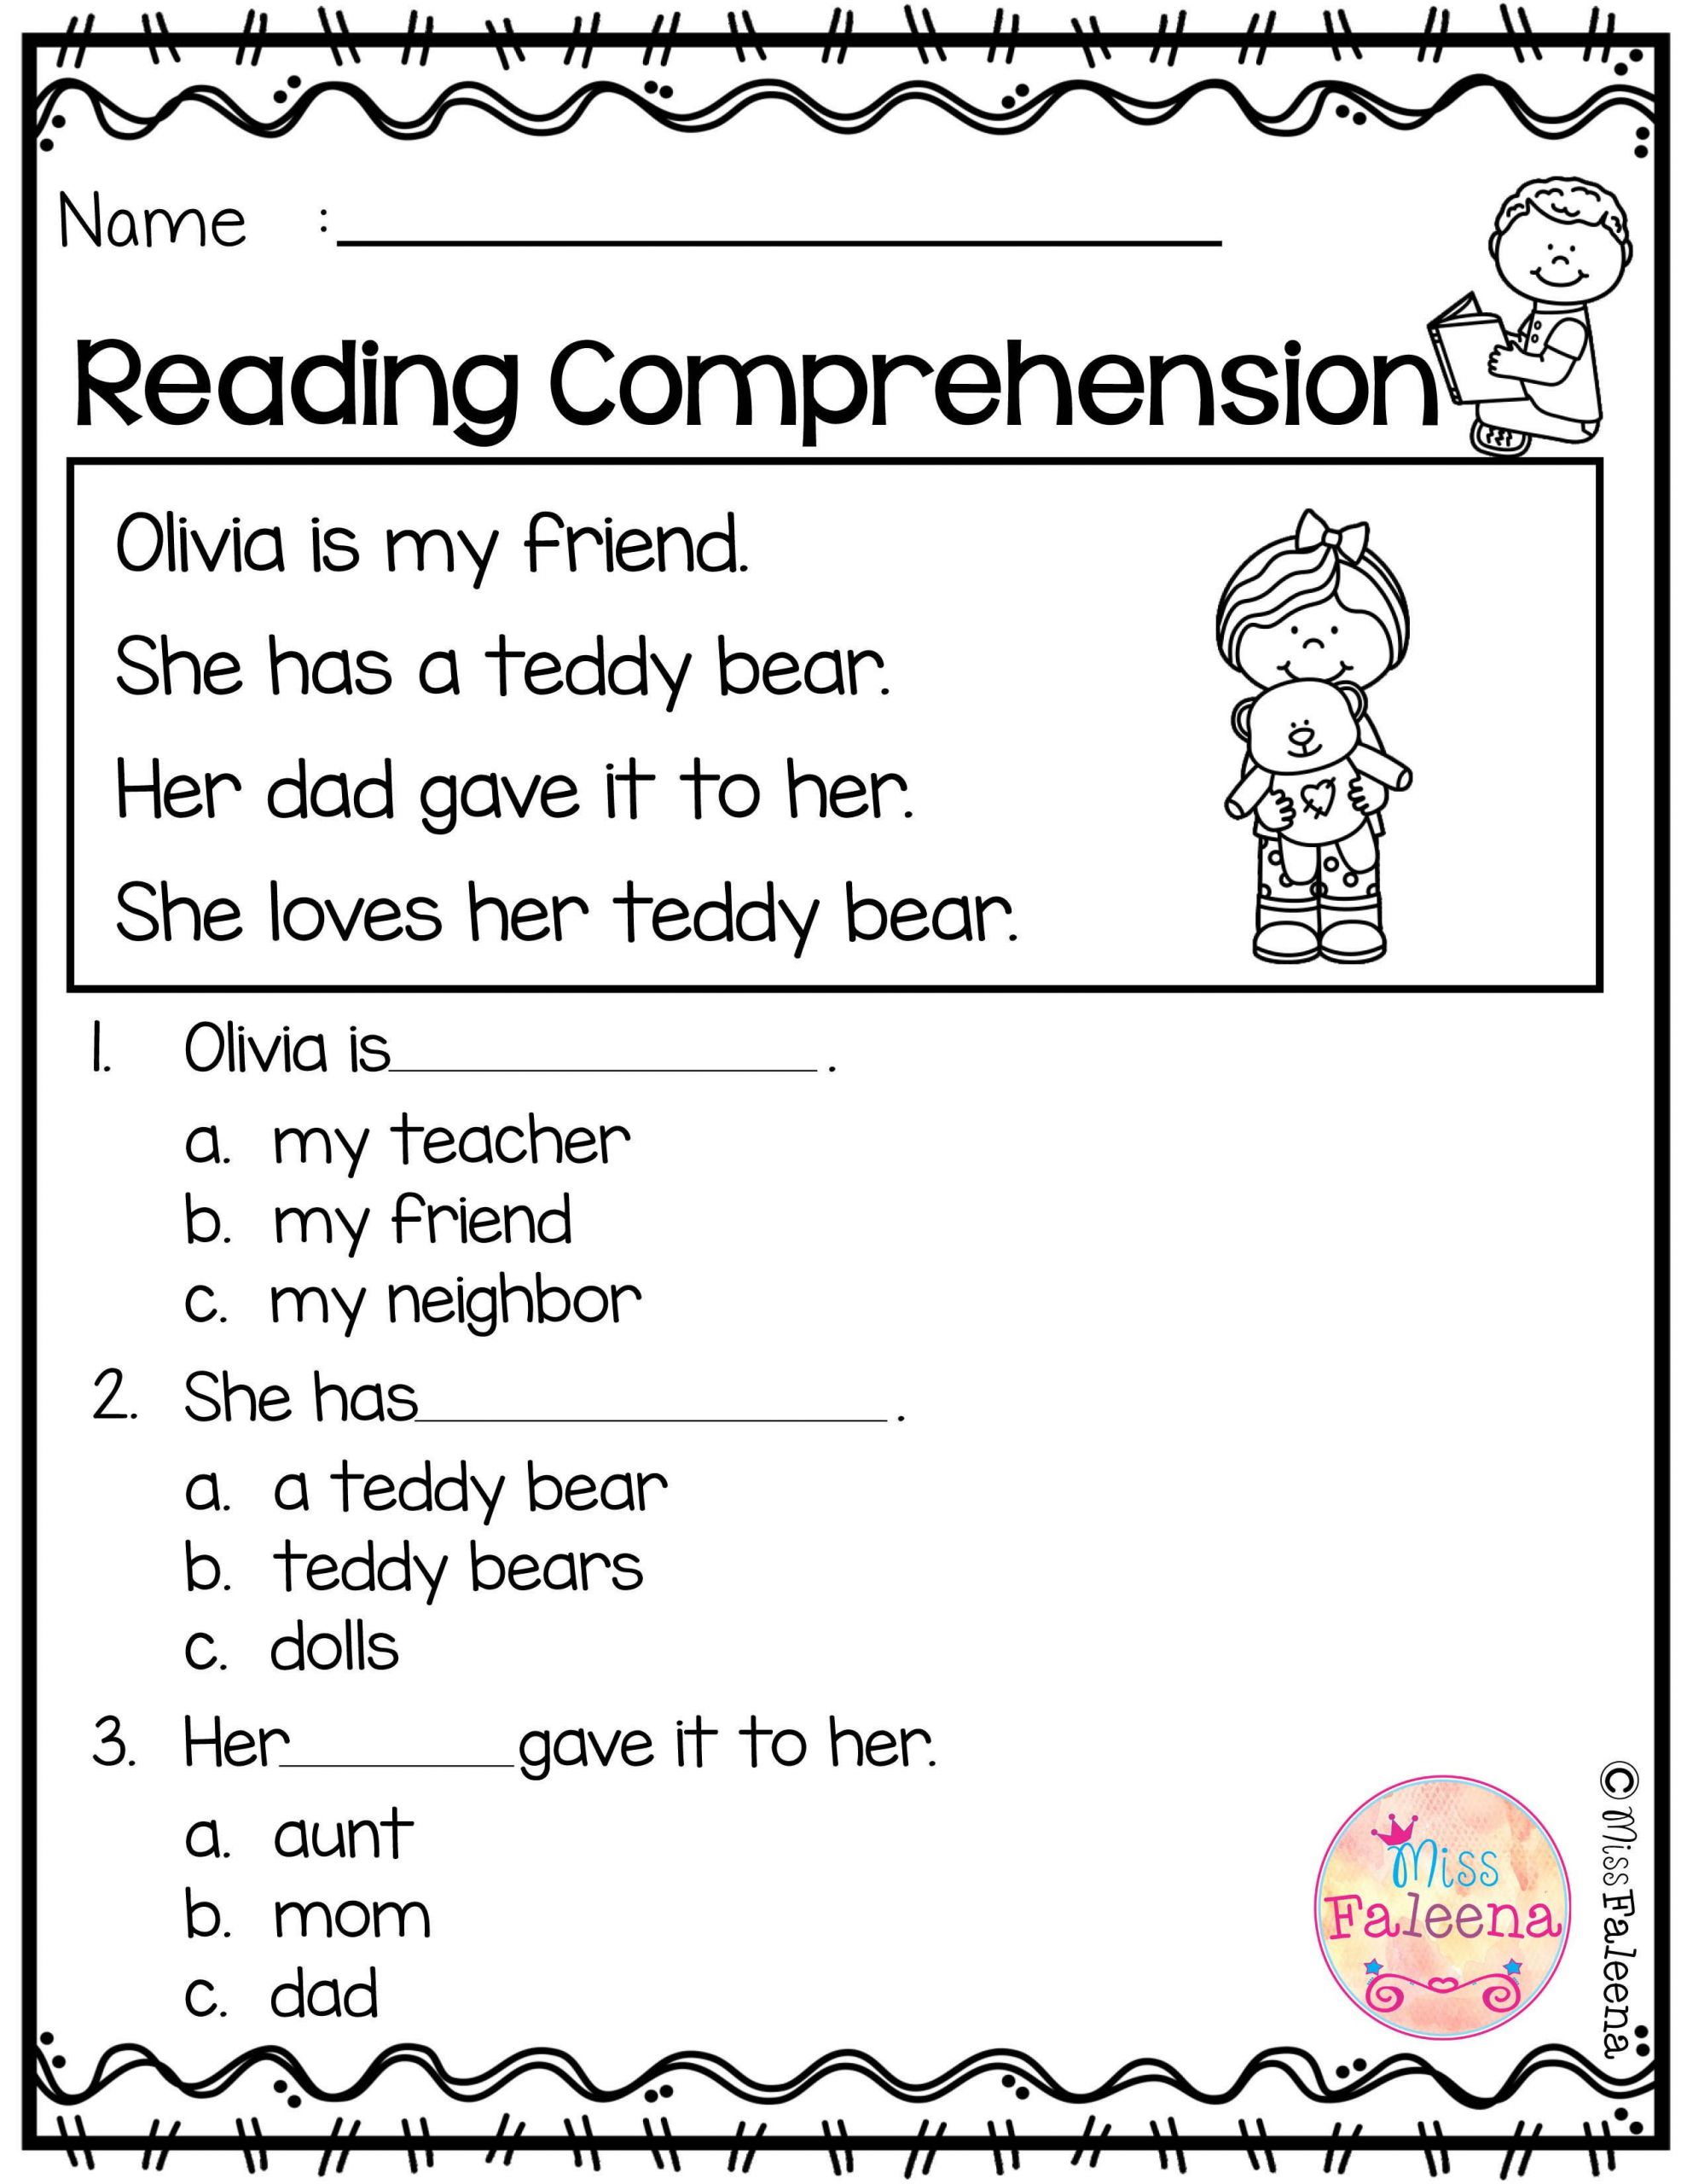 third grade reading worksheets free printable kindergarten 3rd prehension multiple 2550x3300 addition of whole numbers worksheet year mathematics introduction to kids formula honesty for